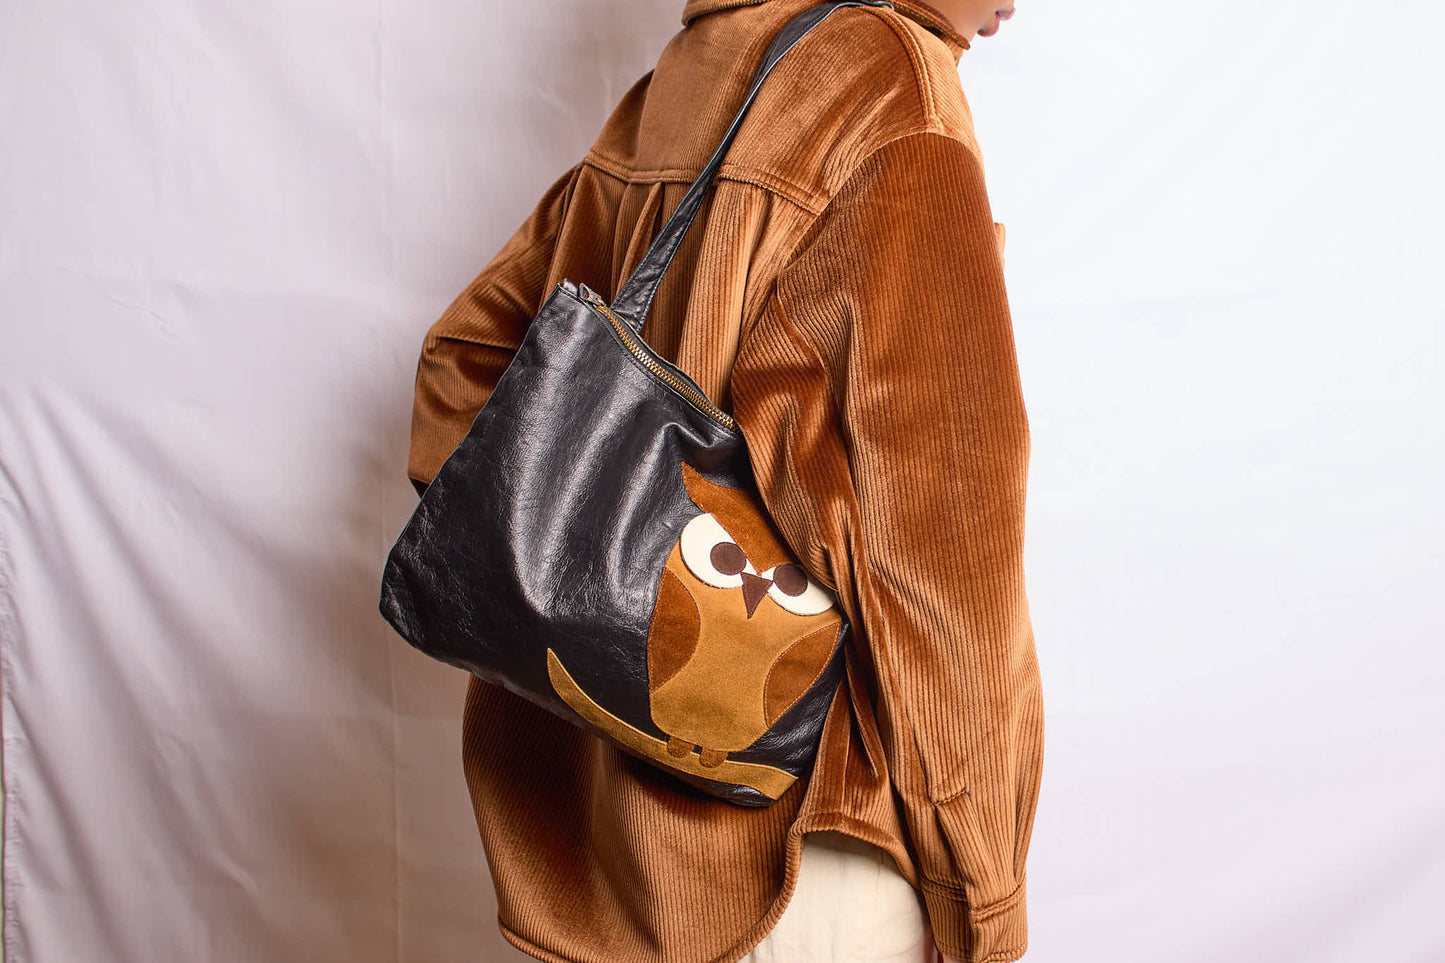 Vintage Davey's Leather Owl Tote